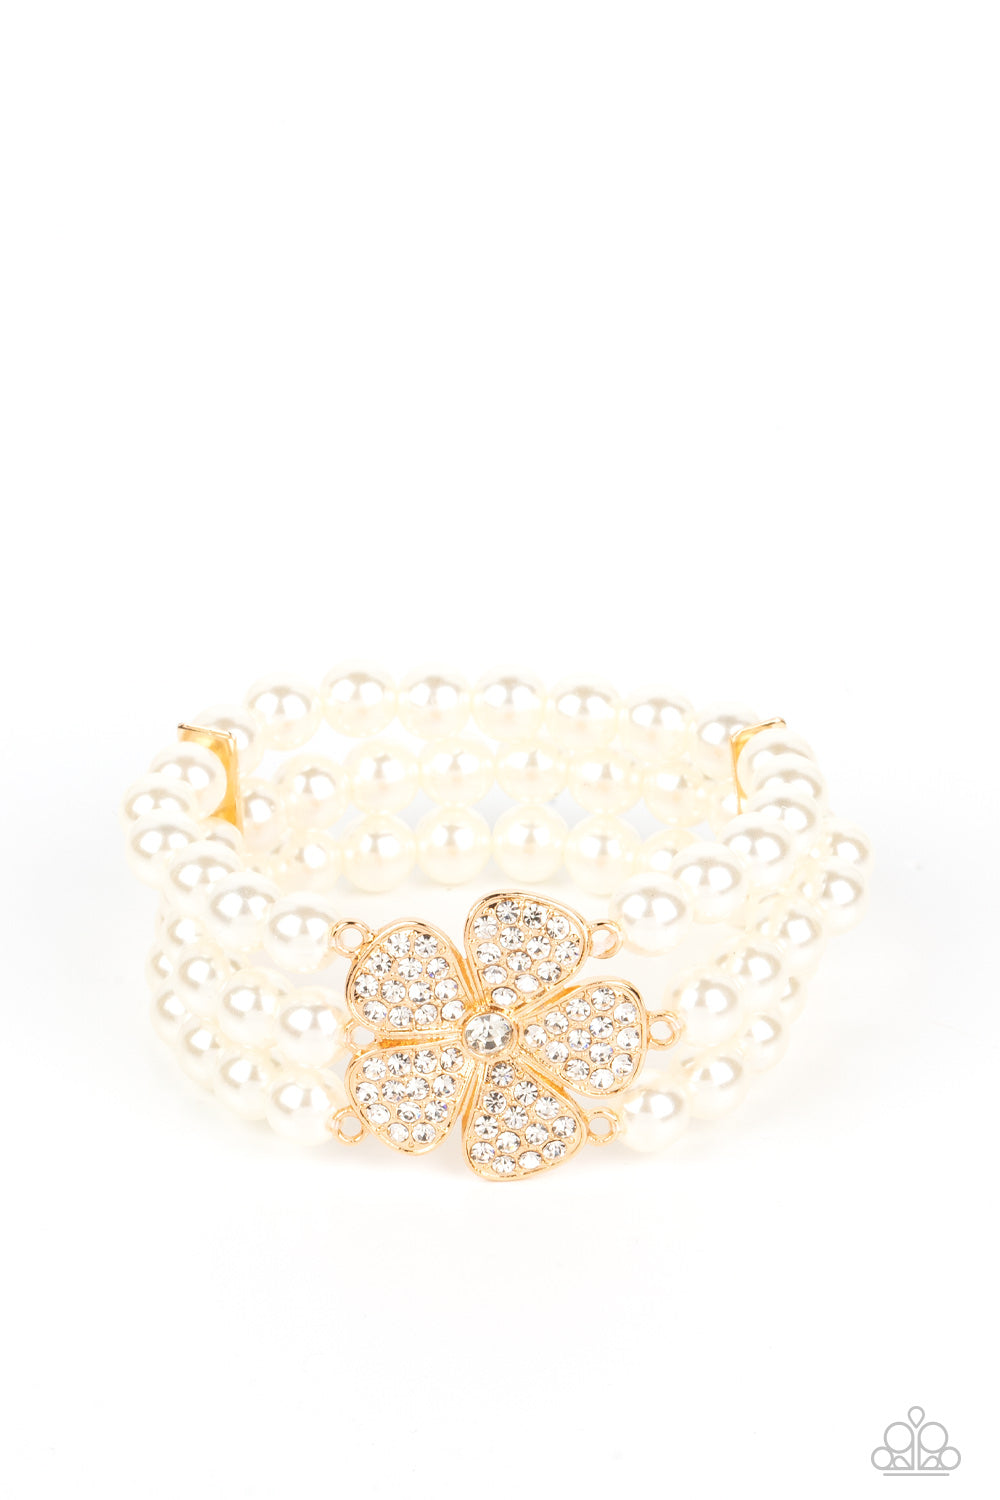 Park Avenue Orchard Gold Pearl Bracelet - Paparazzi Accessories  Separated by dainty gold plates, classic white pearls are threaded along three stretchy bands around the wrist. Encrusted in glassy white rhinestones, a glitzy gold flower blooms at the center of the wrist for a fierce floral statement.  Sold as one individual bracelet.